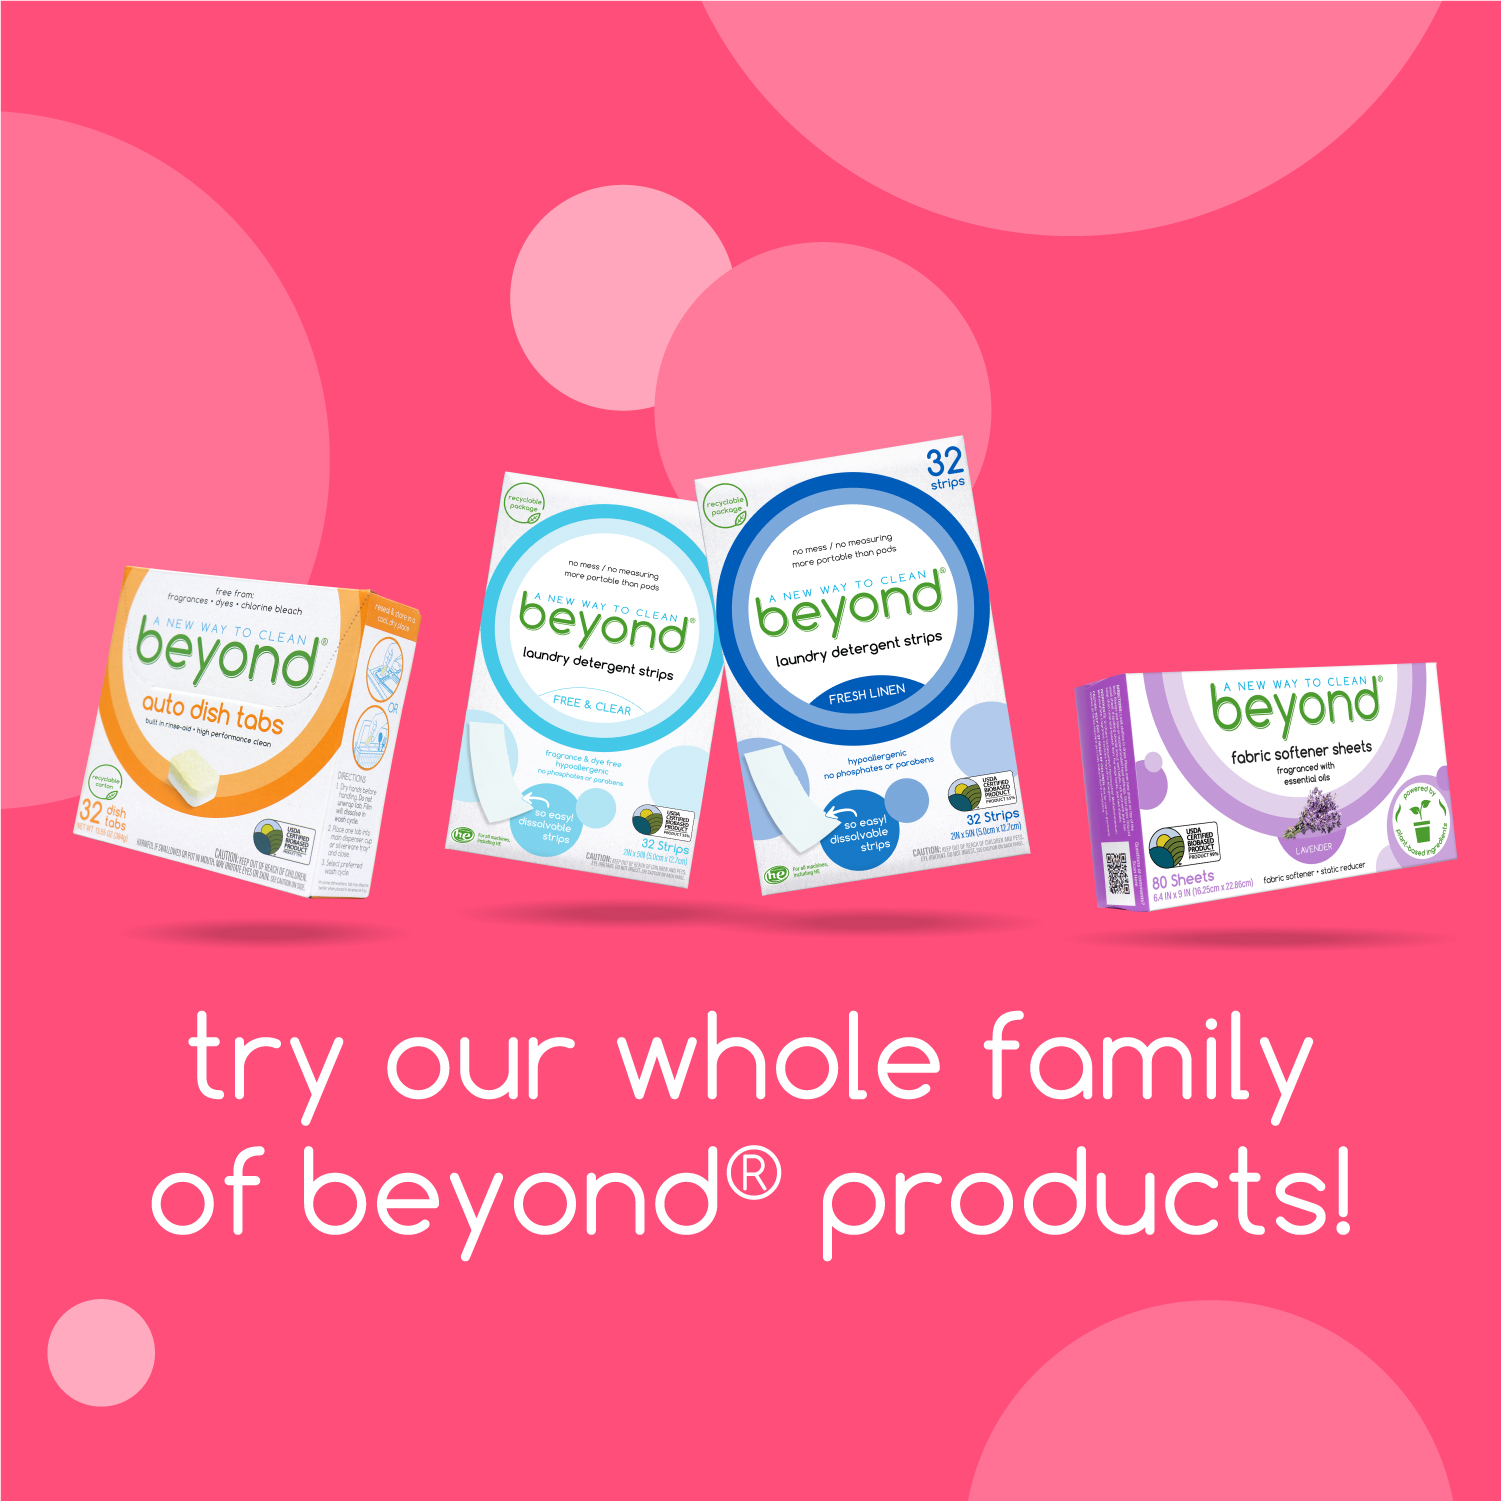 Beyond Laundry Detergent Strips [32 strips] - Free & Clear - image 7 of 7